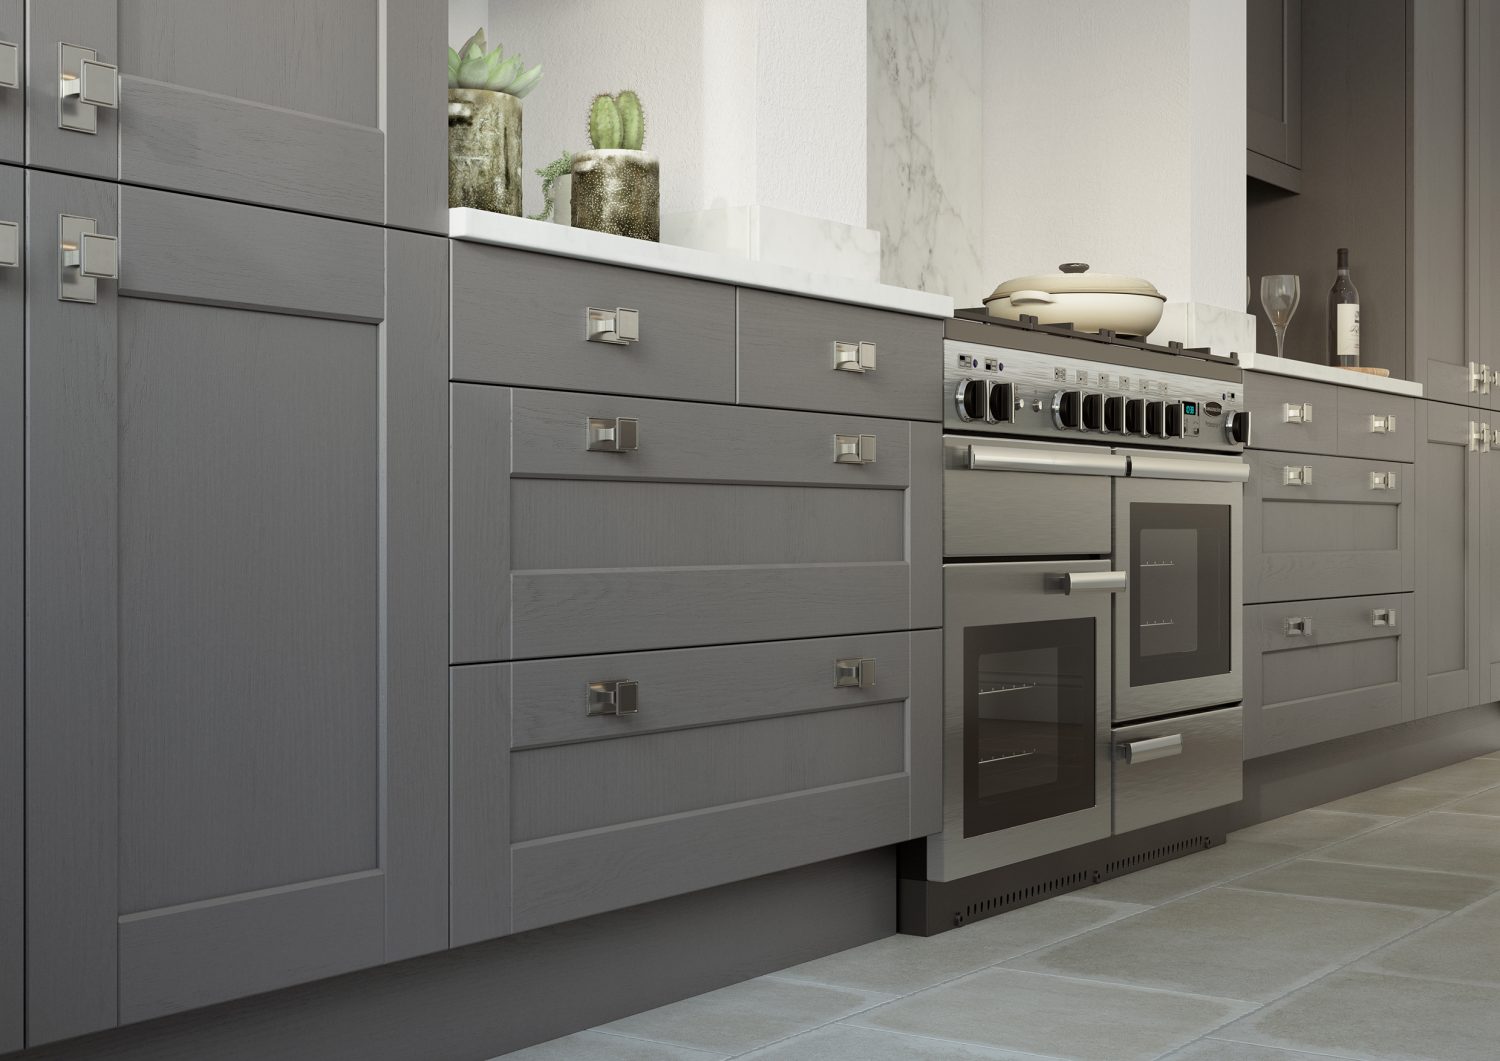 Kendal shaker kitchen drawers and cabinets in Dust Grey, made by The Kitchen Depot, alongside an oven.